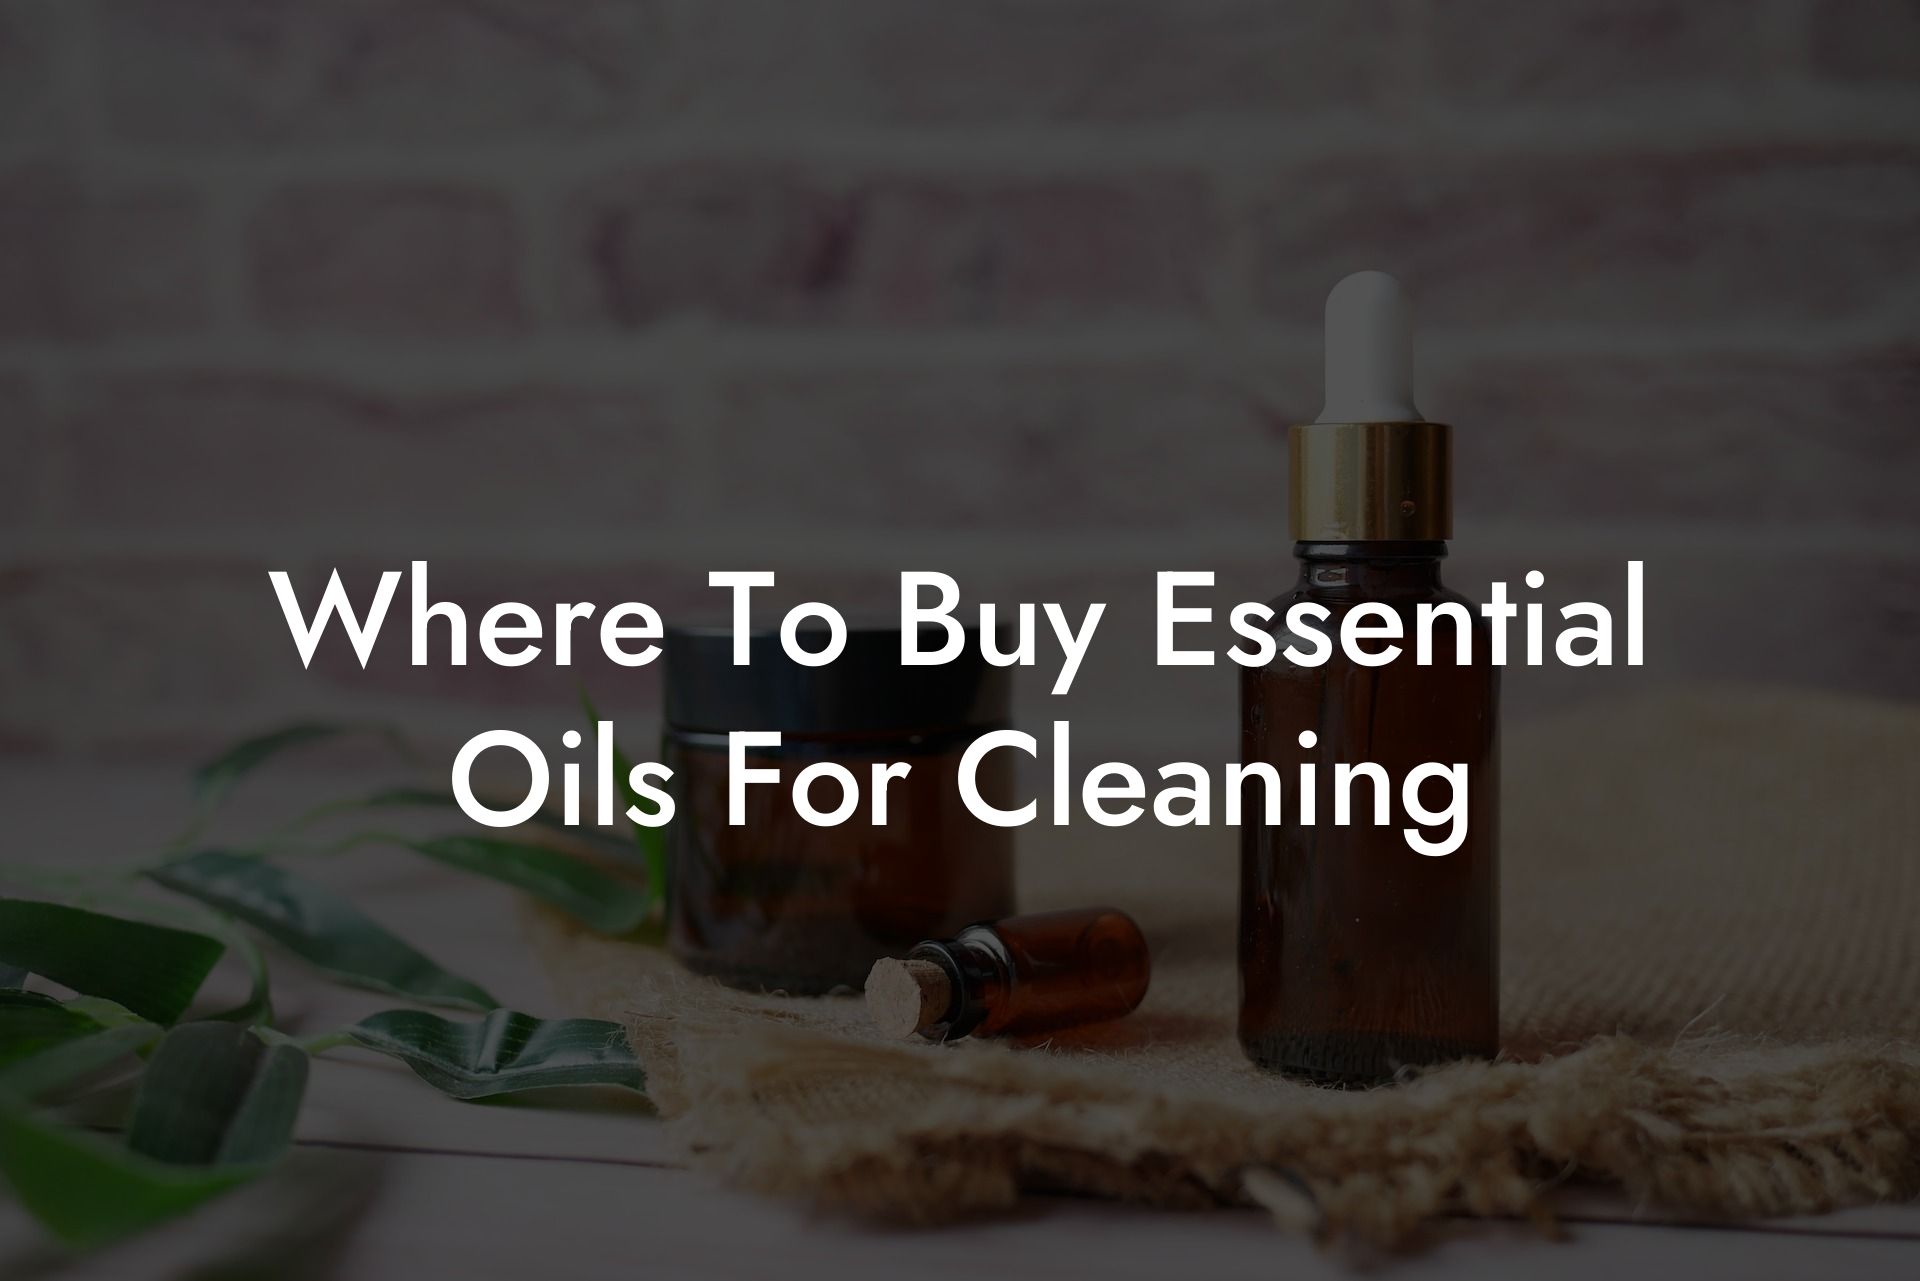 Where To Buy Essential Oils For Cleaning